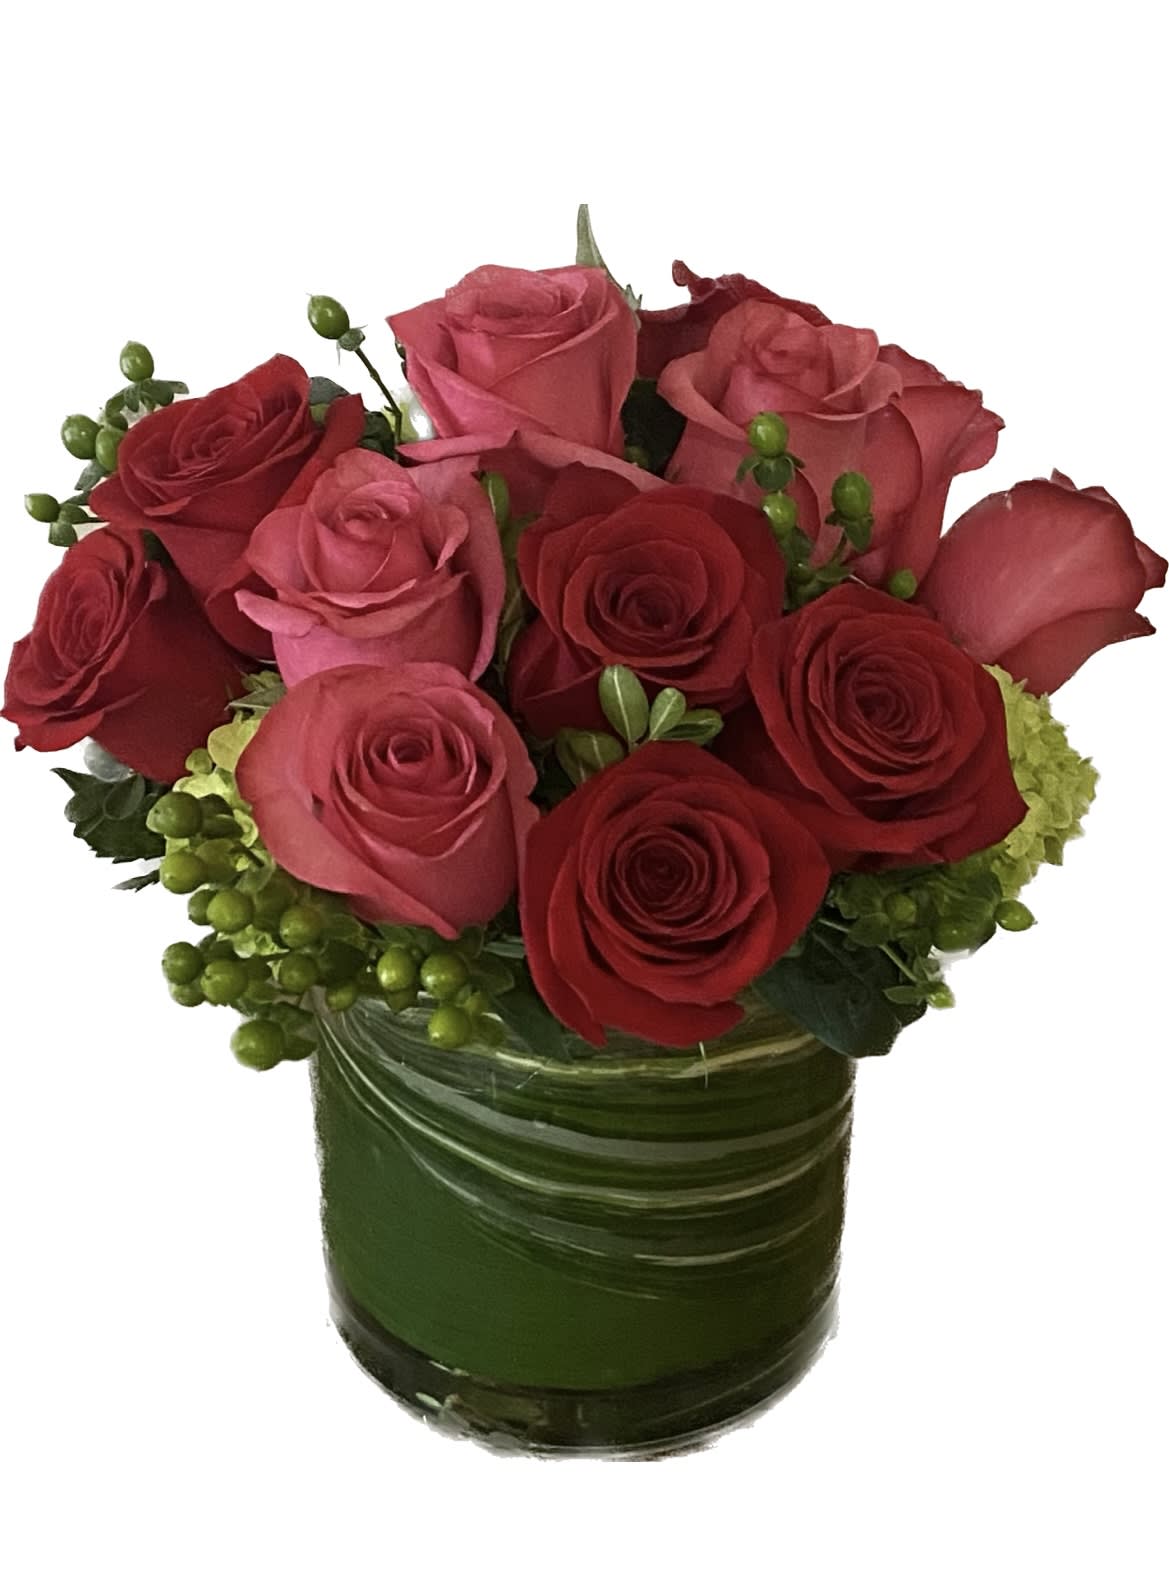 Half &amp; Half Short Stack - Half a dozen vibrant red paired with half a dozen hot pink roses.  Gorgeous bright green hydrangea and tasteful accents compliment the classic Valentine's Day staple flower.  Arranged in an eye catching leaf wrapped cylinder.  Perfect for this years most romantic holiday.